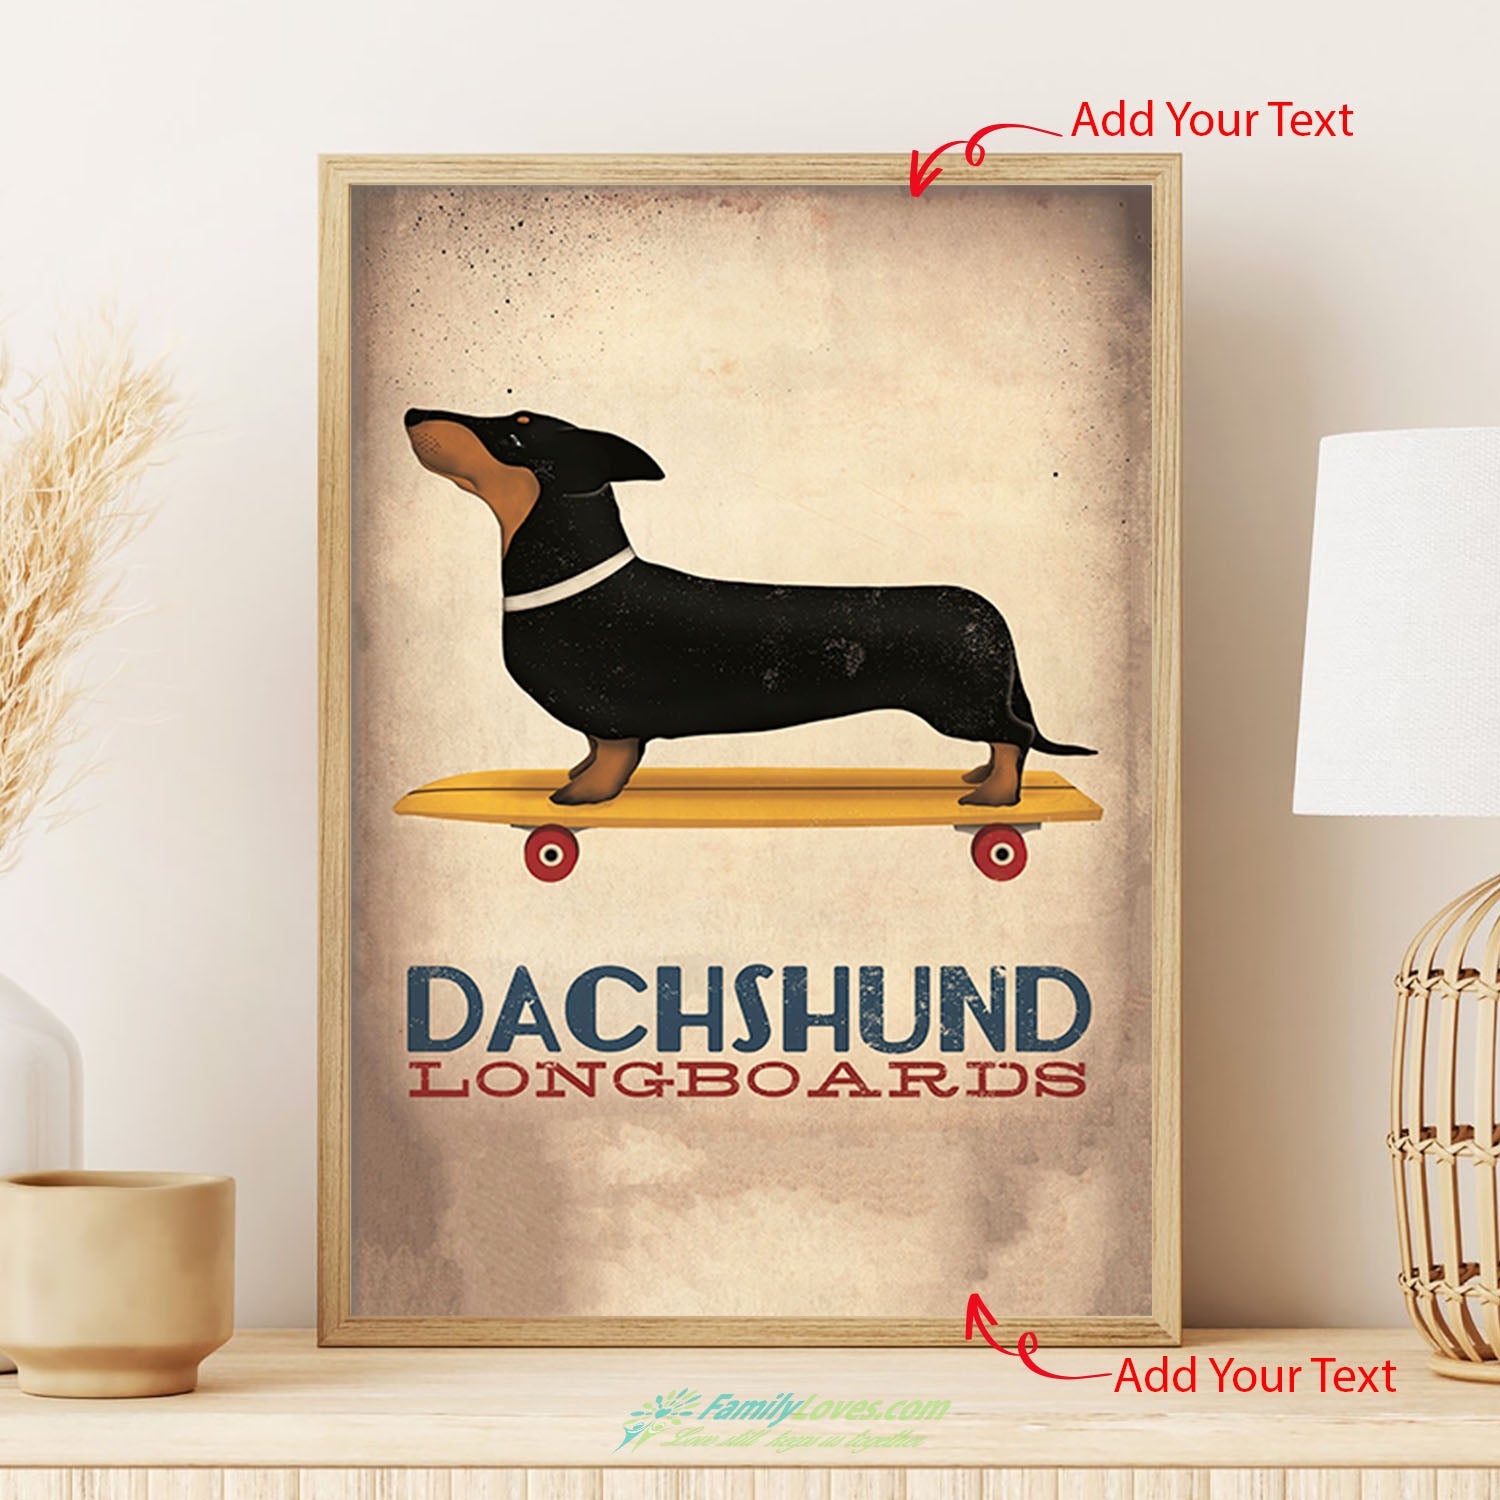 Dachshund Longboards Canvas Oil Painting Poster Room Decor All Size 1